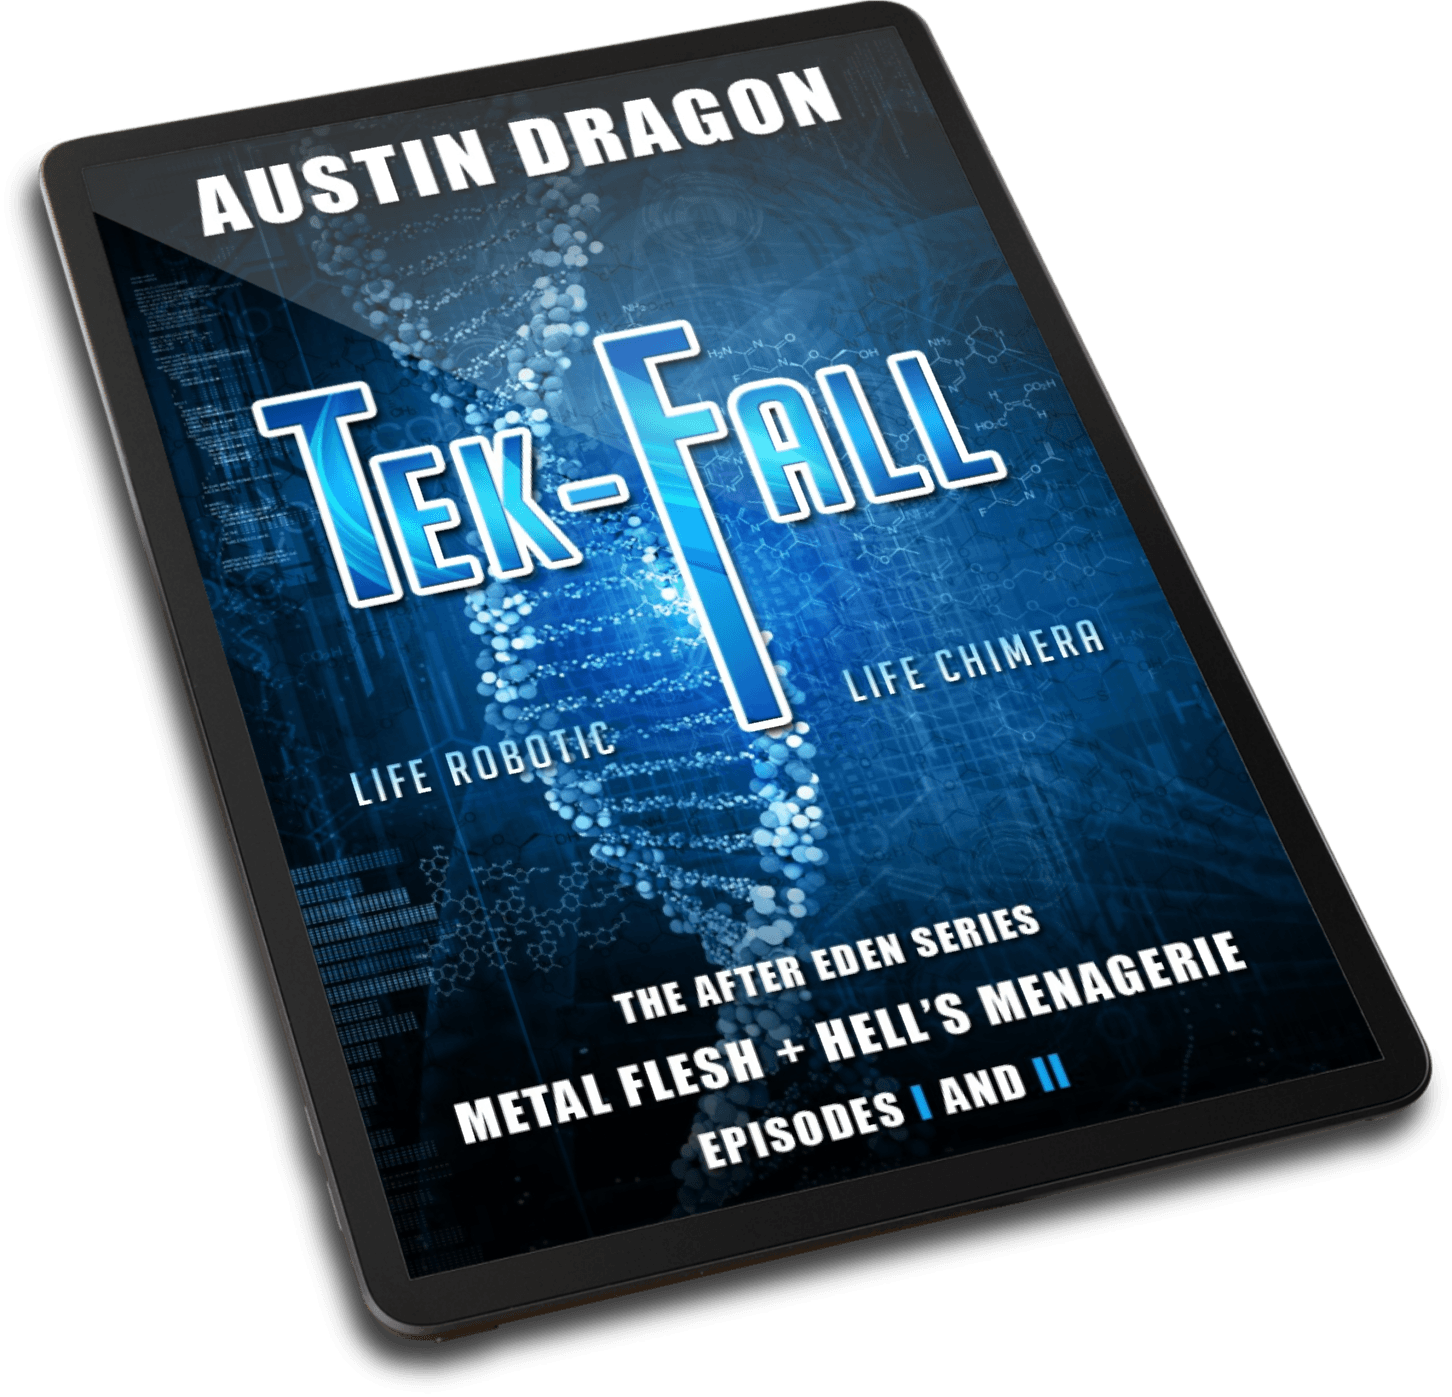 Tek-Fall: Metal Flesh + Hell's Menagerie (The After Eden Series: The Complete Duology) Ebook